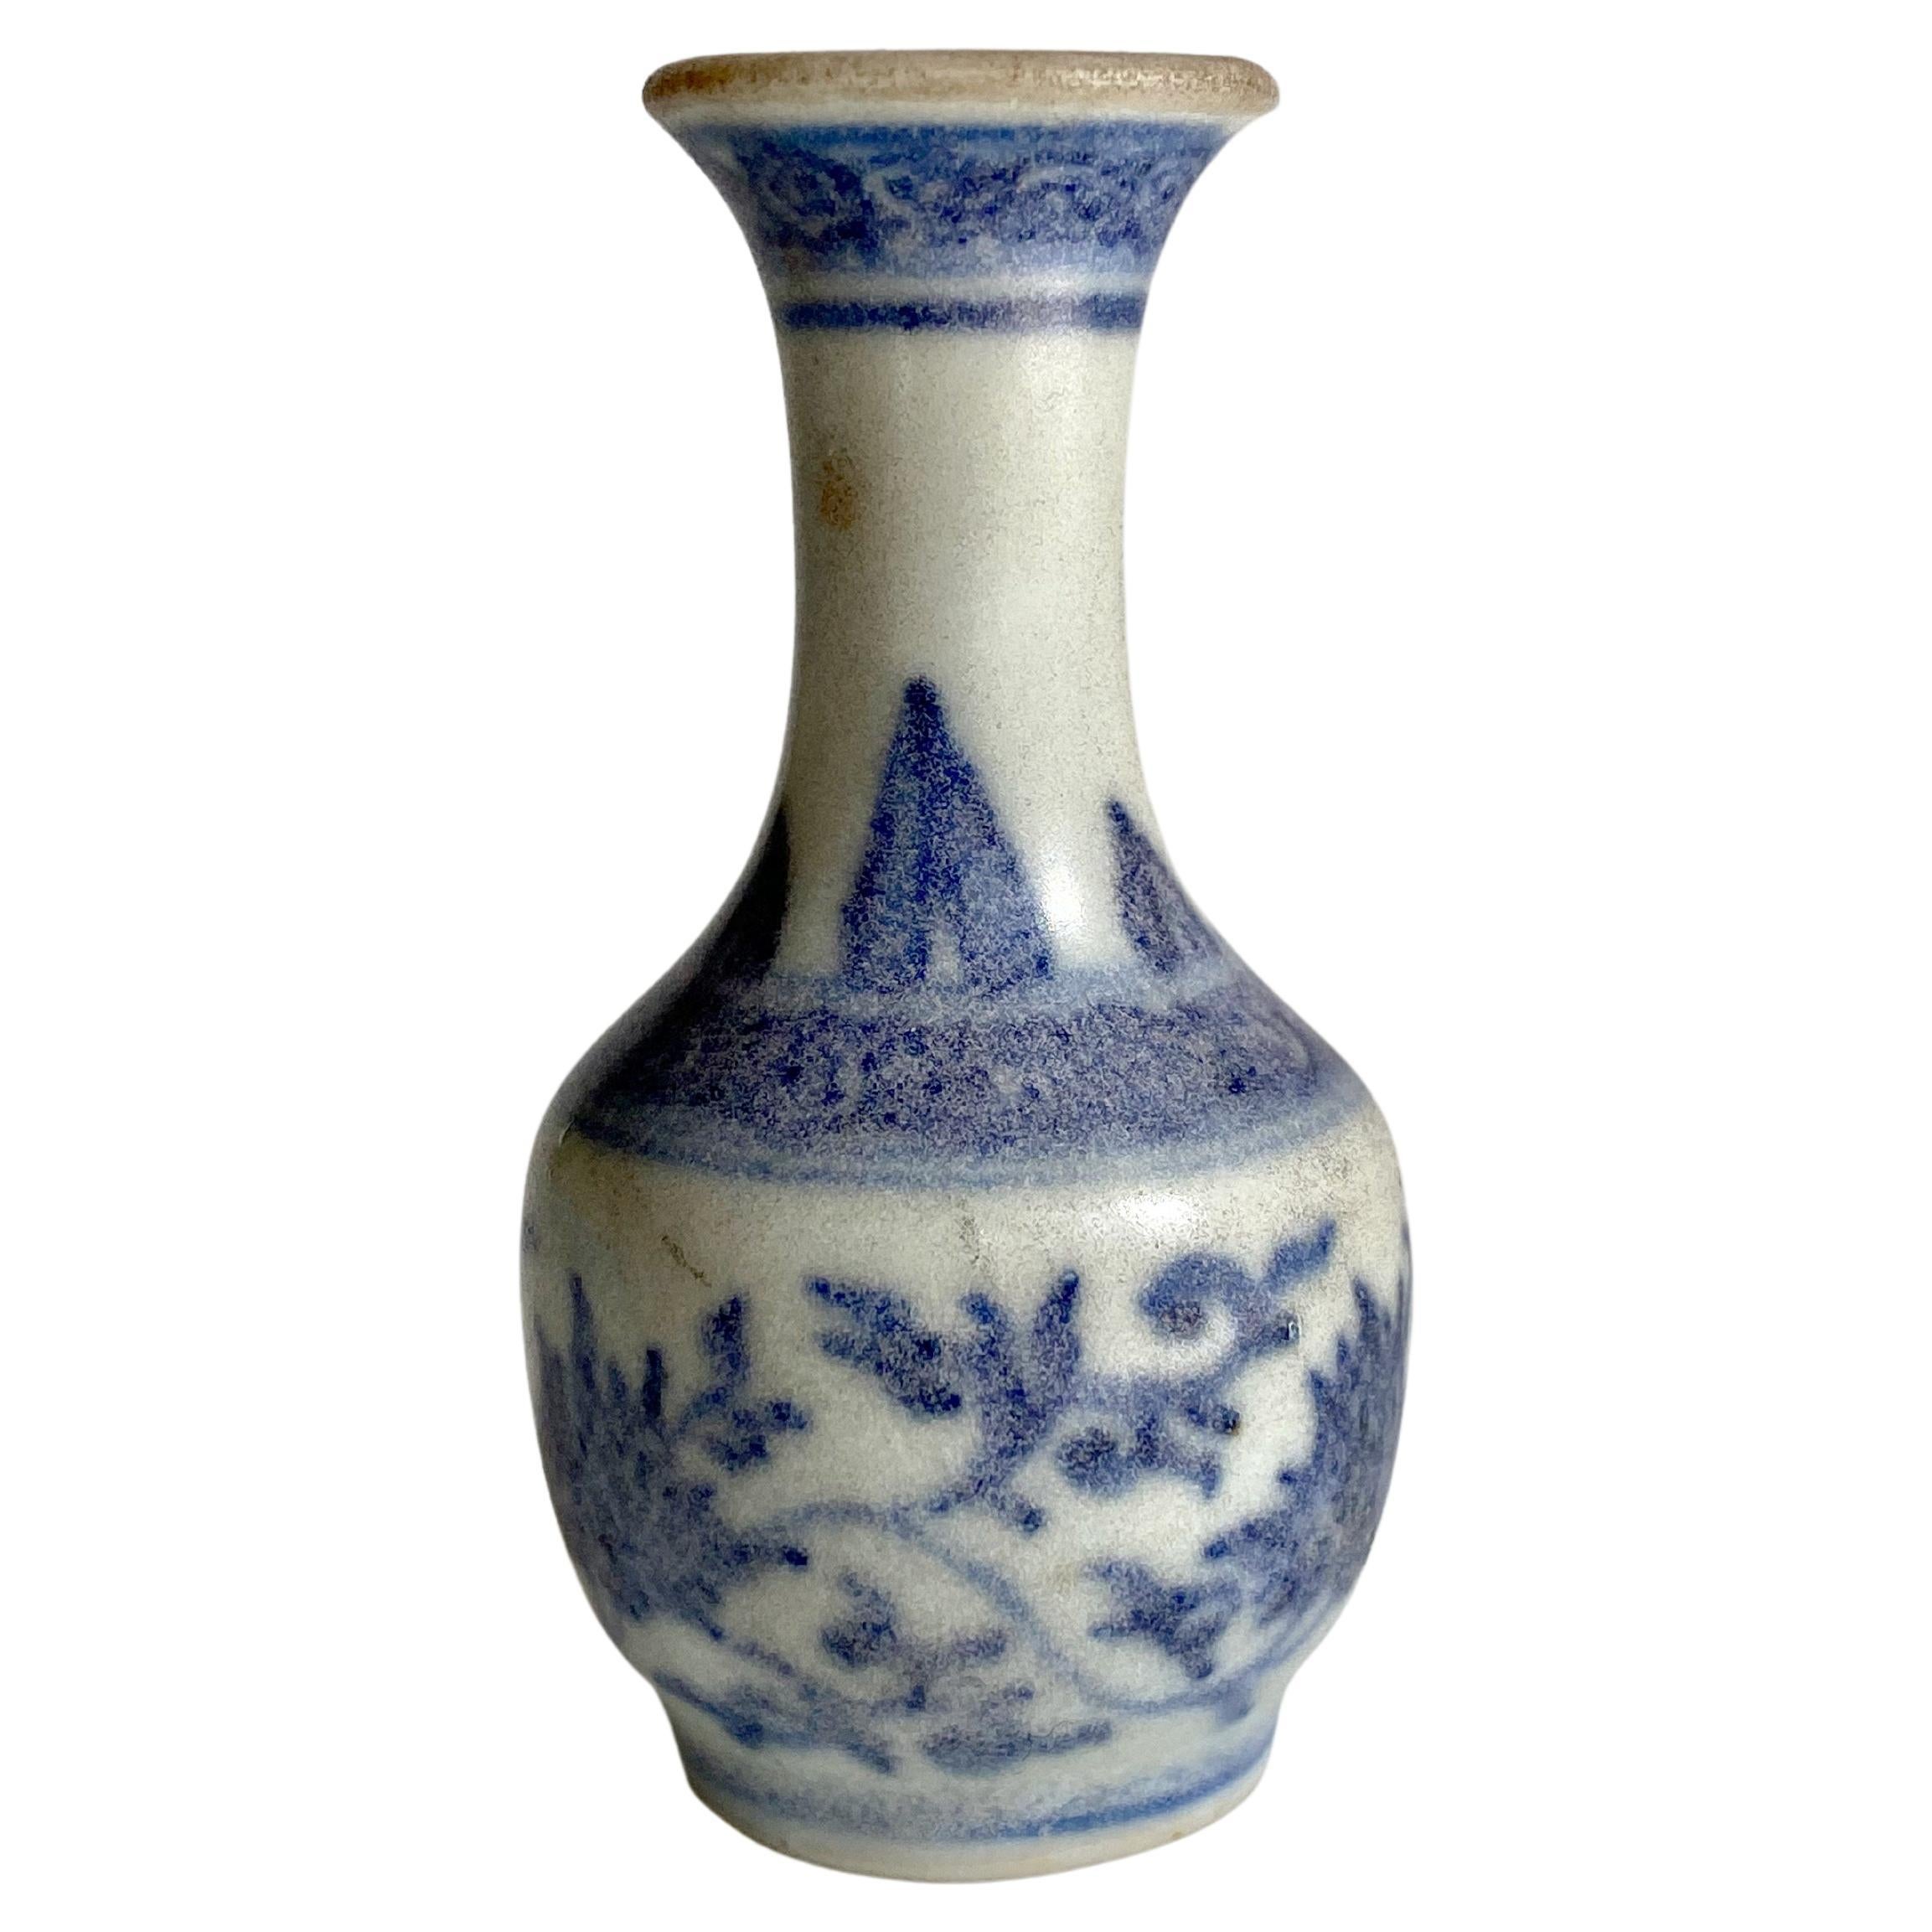 Miniature Vase from Hatcher Collection with Flared Rim